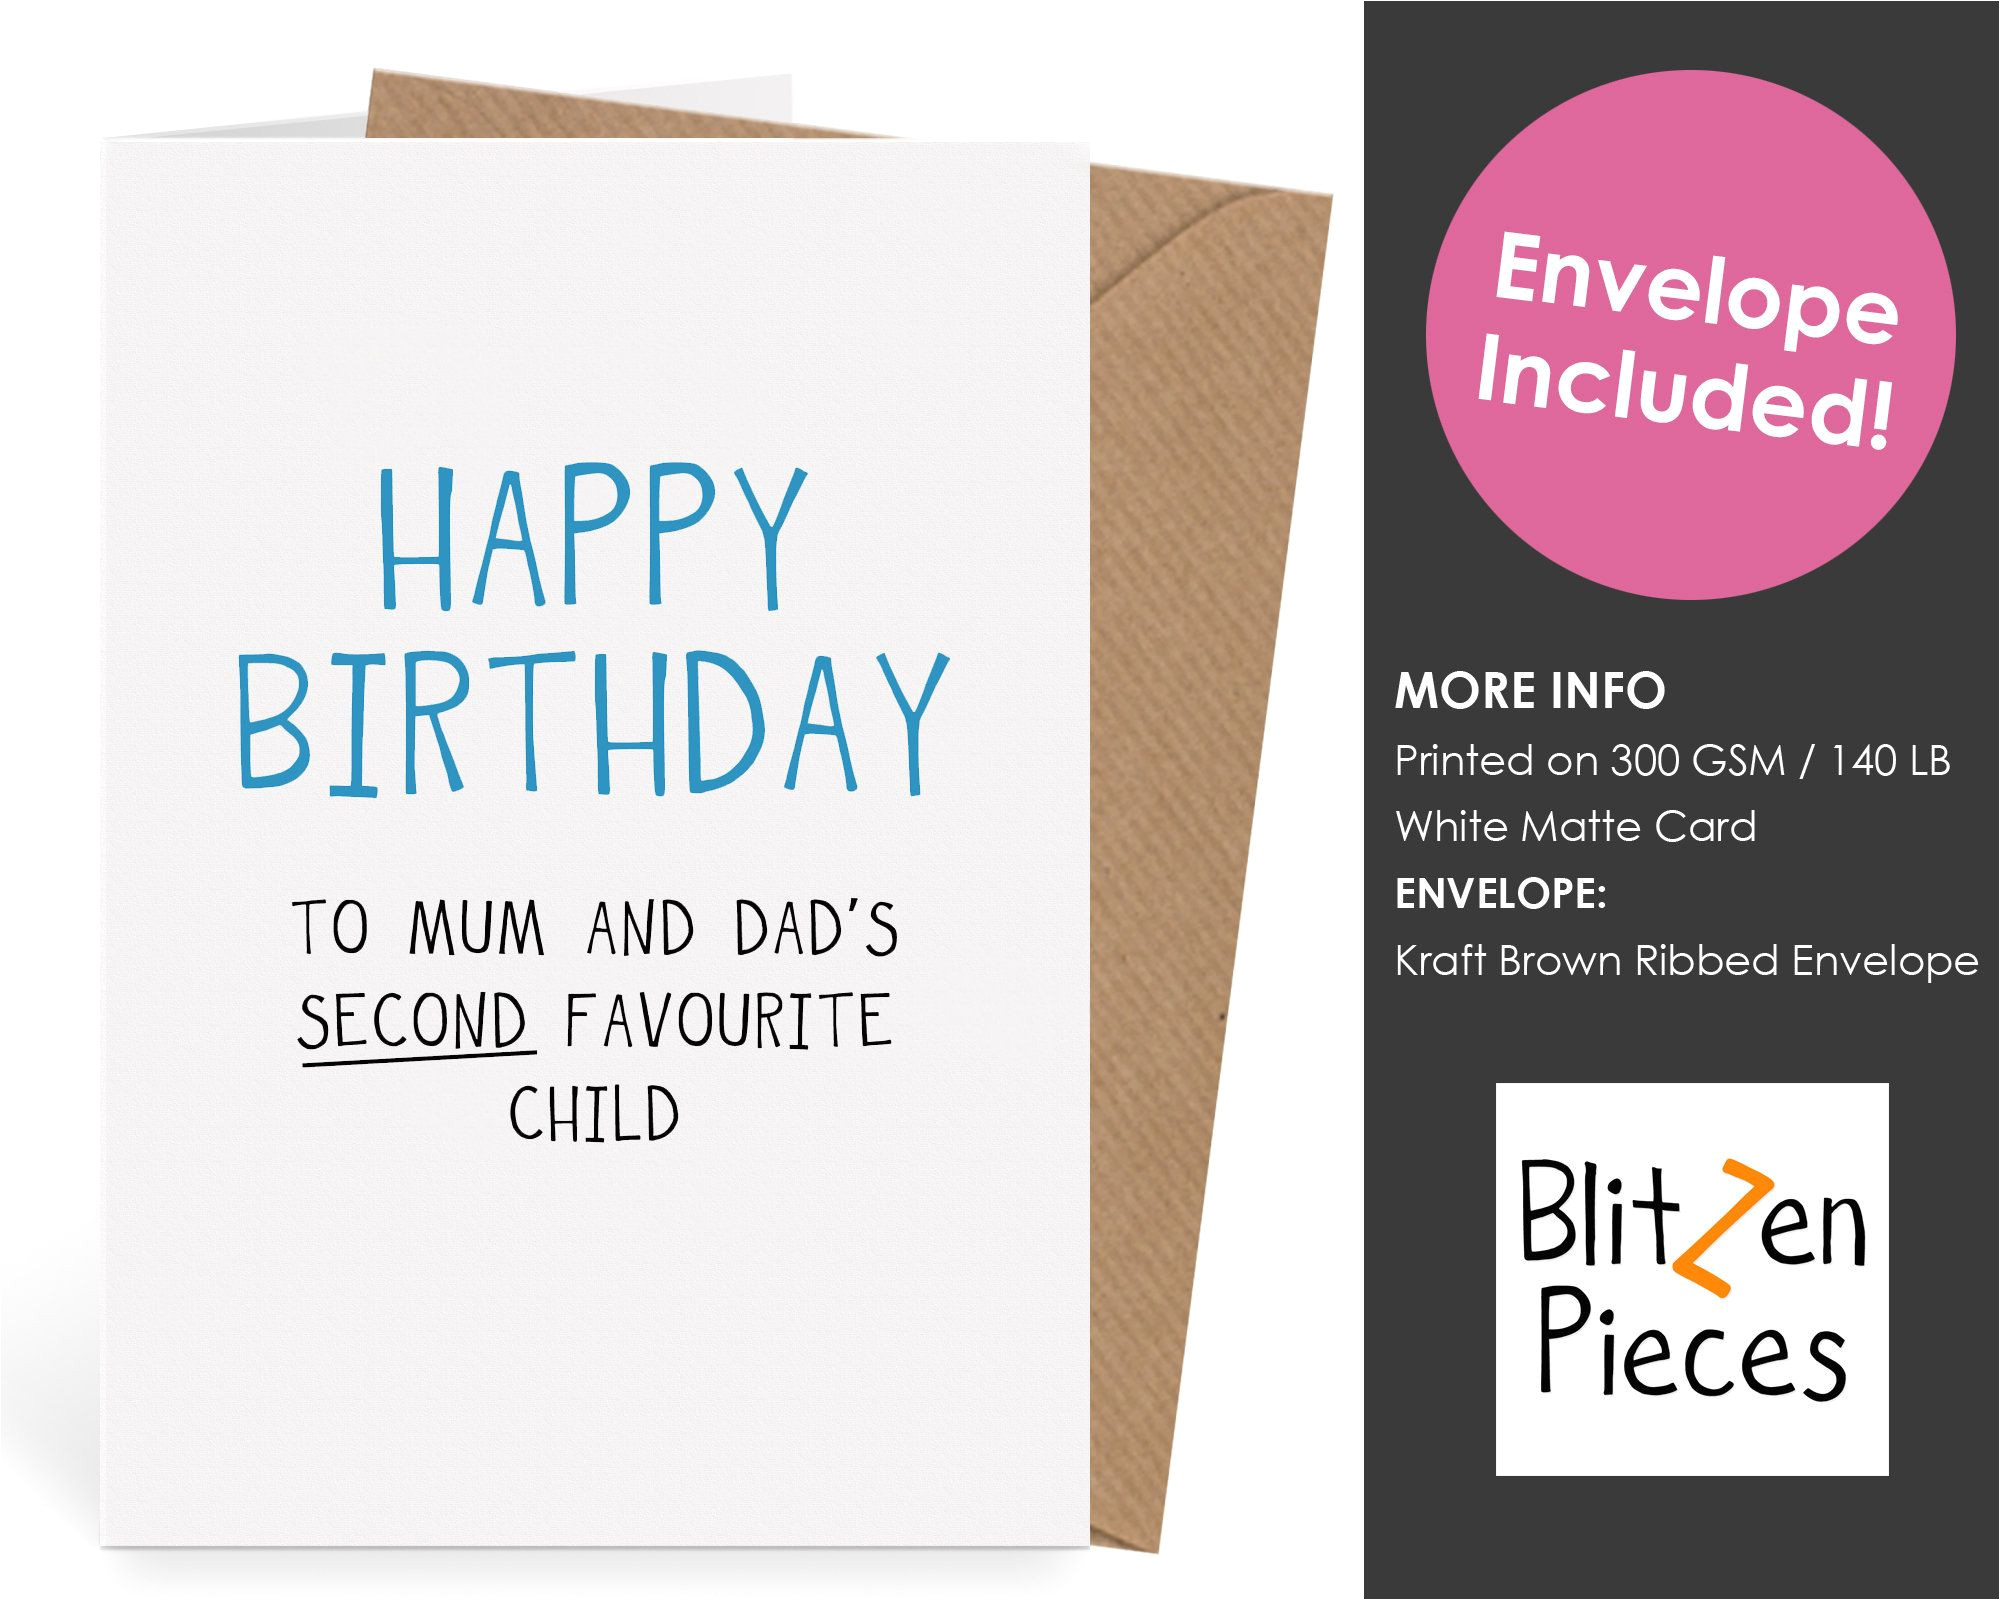 Greeting Card About Happy Birthday Funny Birthday Card for Sibling Happy Birthday to Mum and